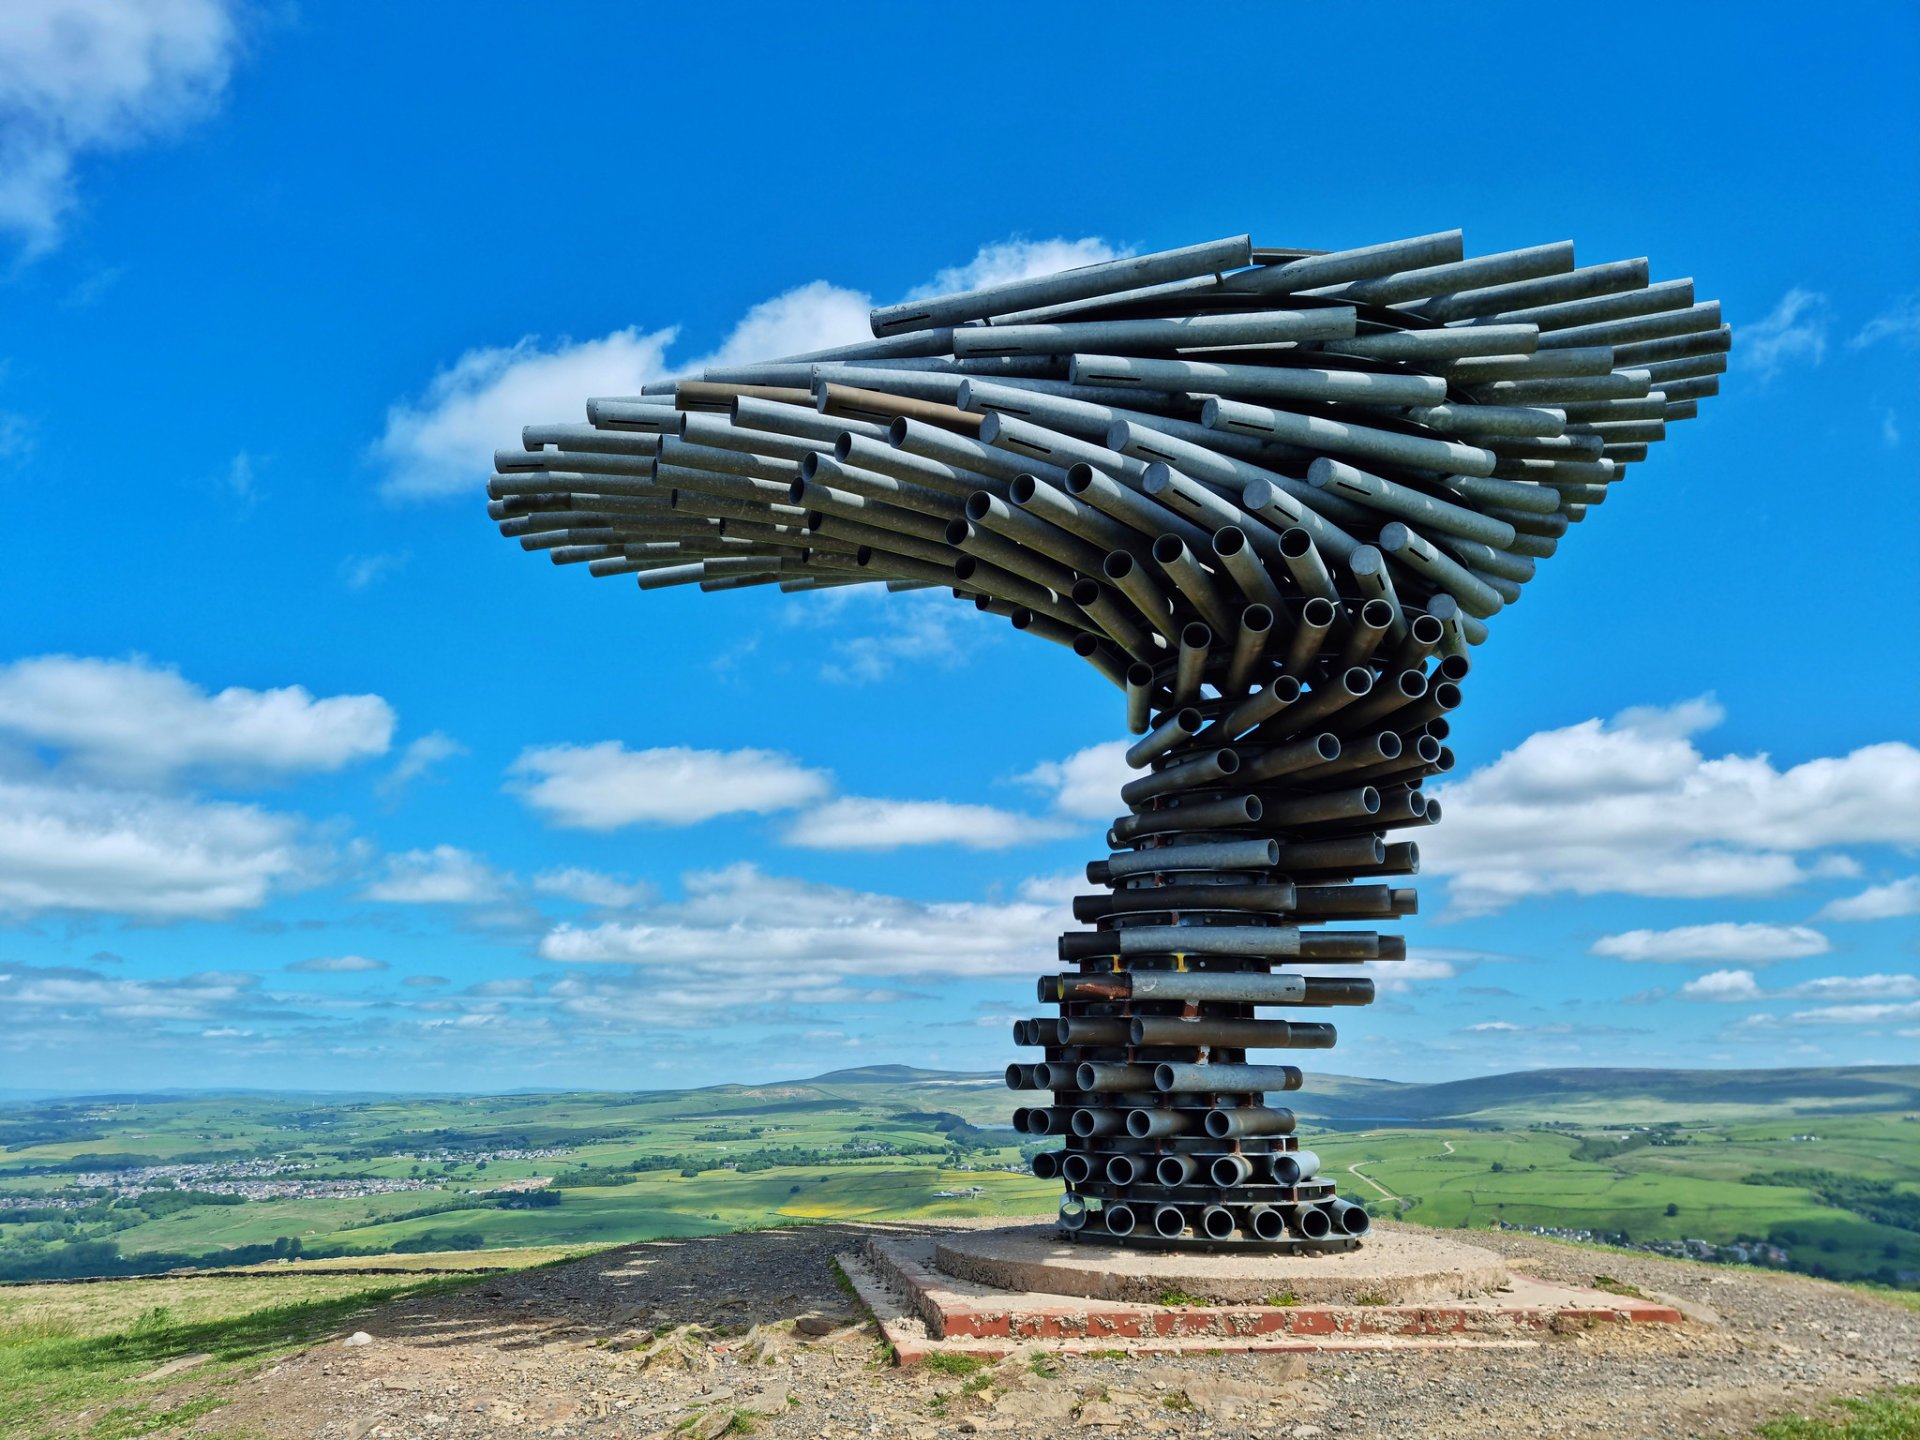 The Singing Ringing Tree is a wind powered sound sculpture, which produces  penetrating choral sounds covering a range of several octaves. : r/pics